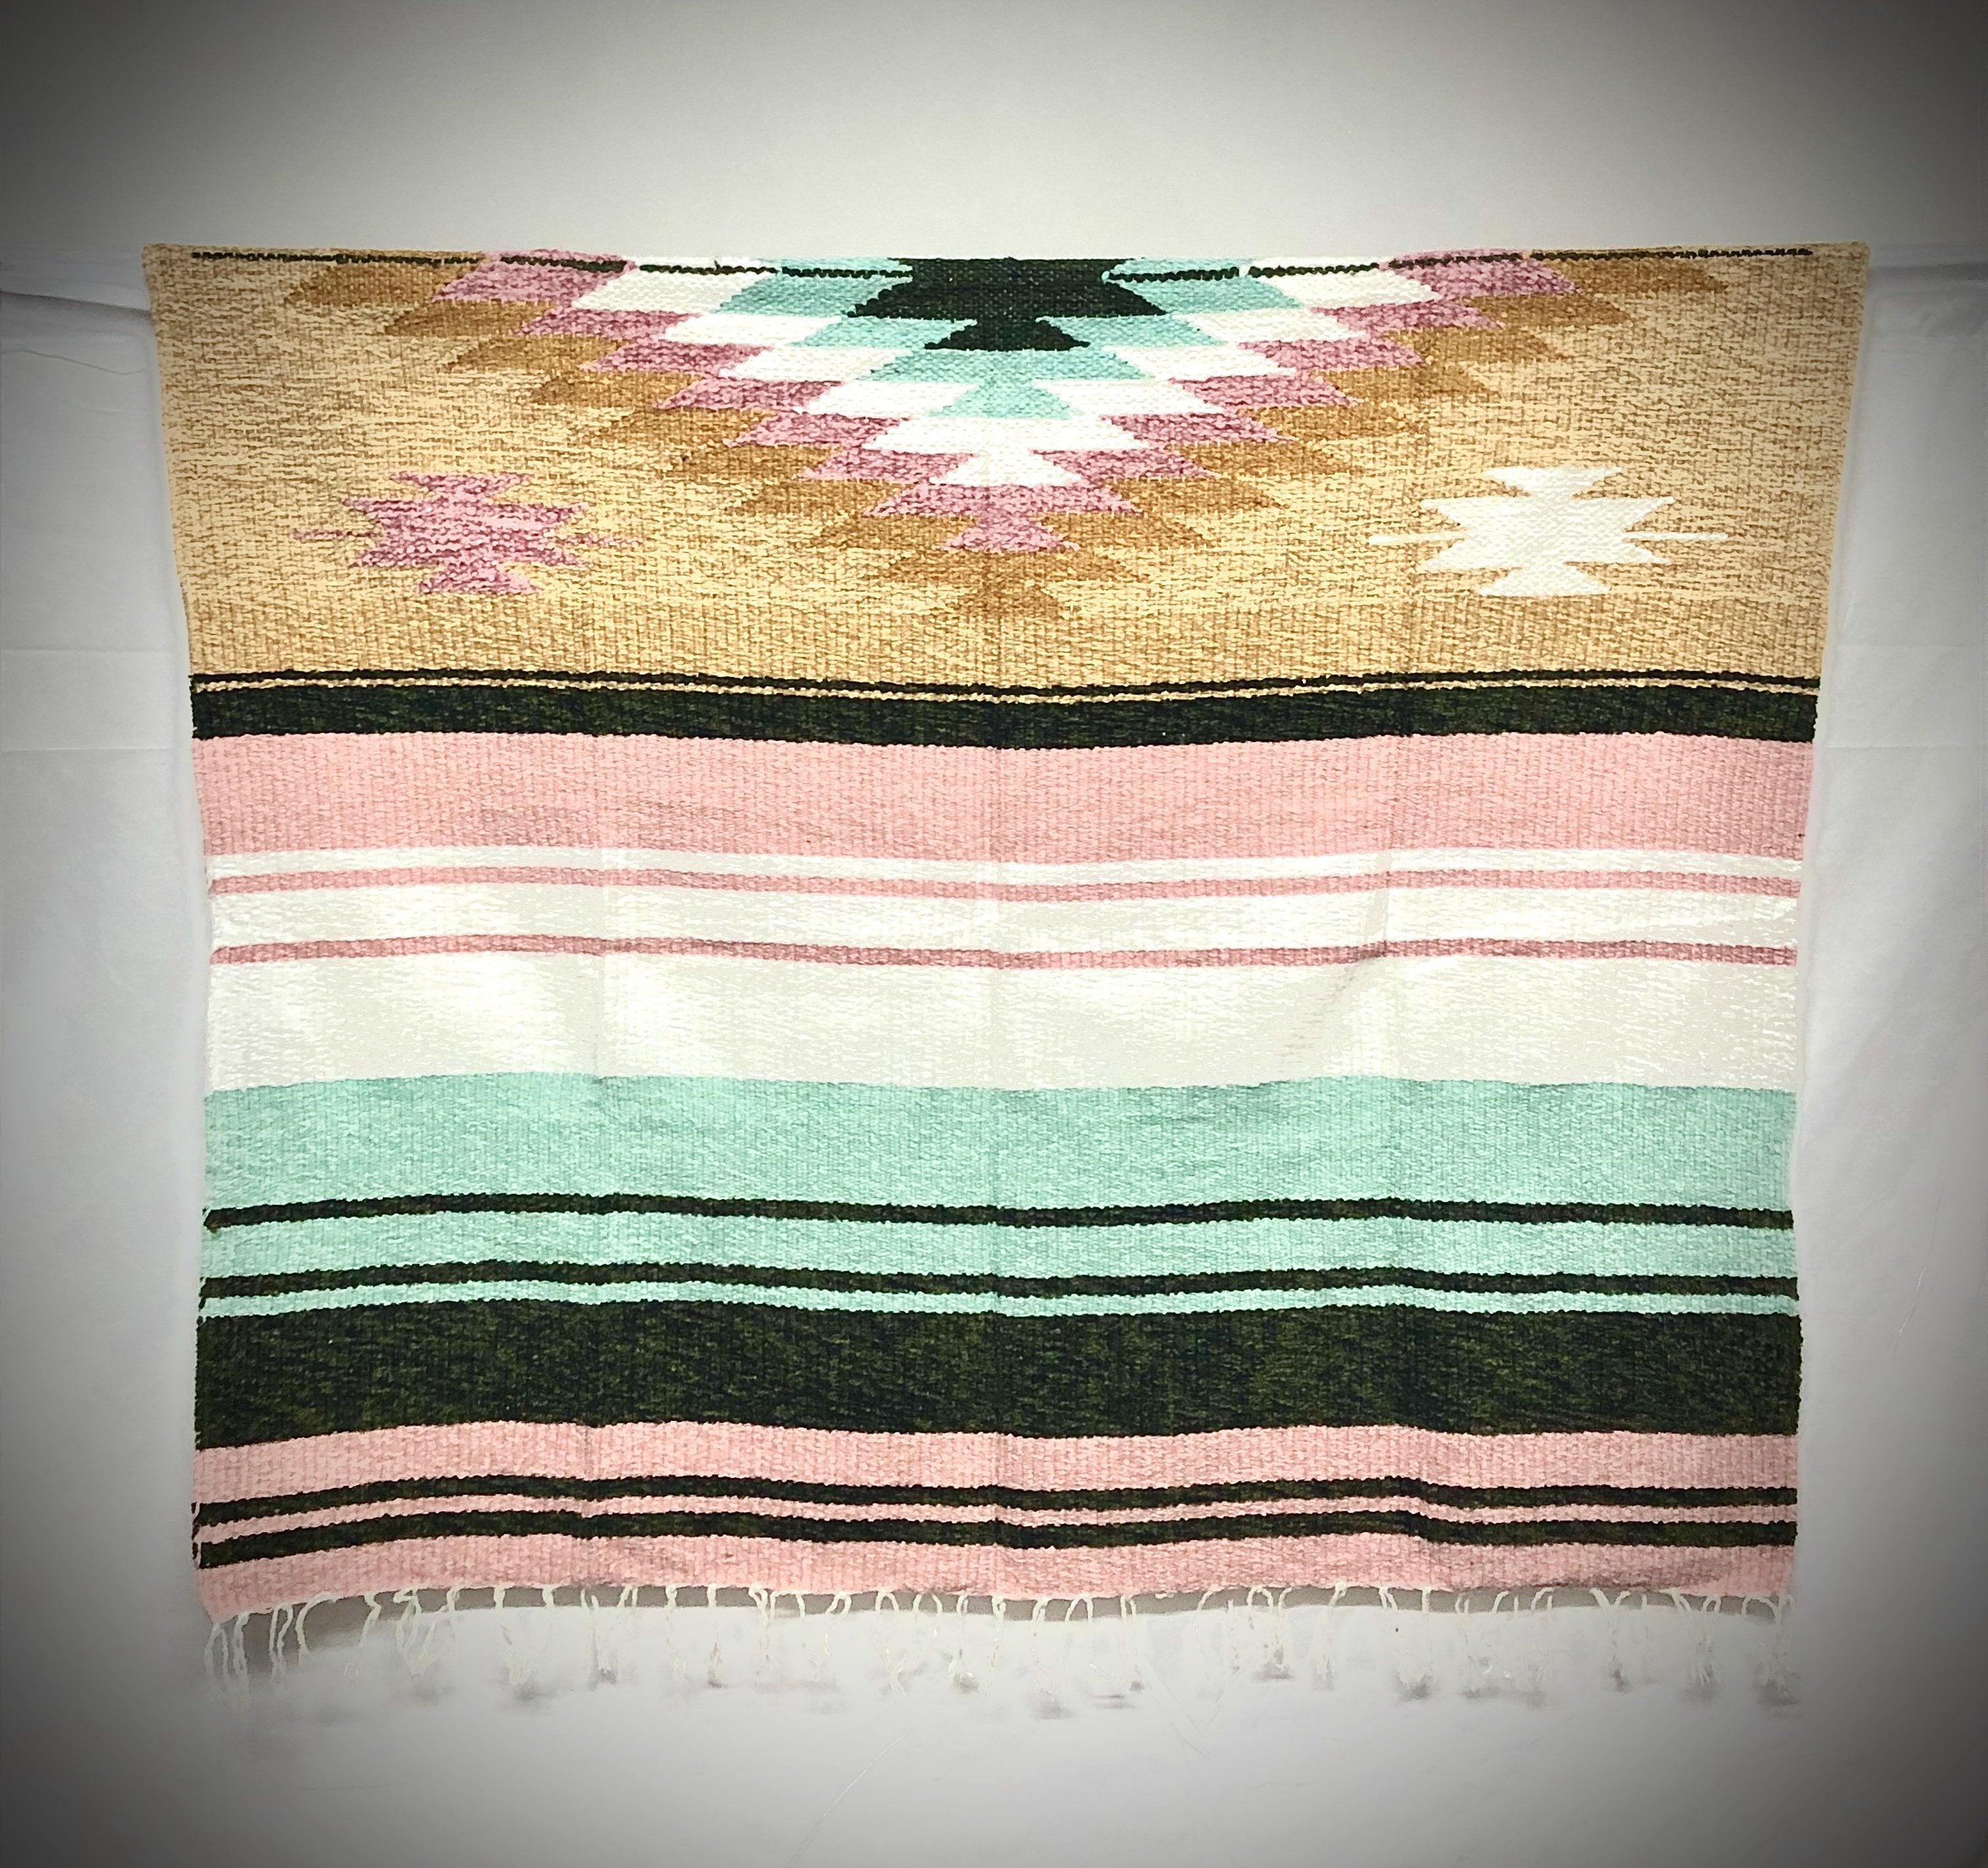 Wholesale: QTY 3 Pack of The Chenille “Diamante” (Pastel Pink/Turquoise Special Edition)